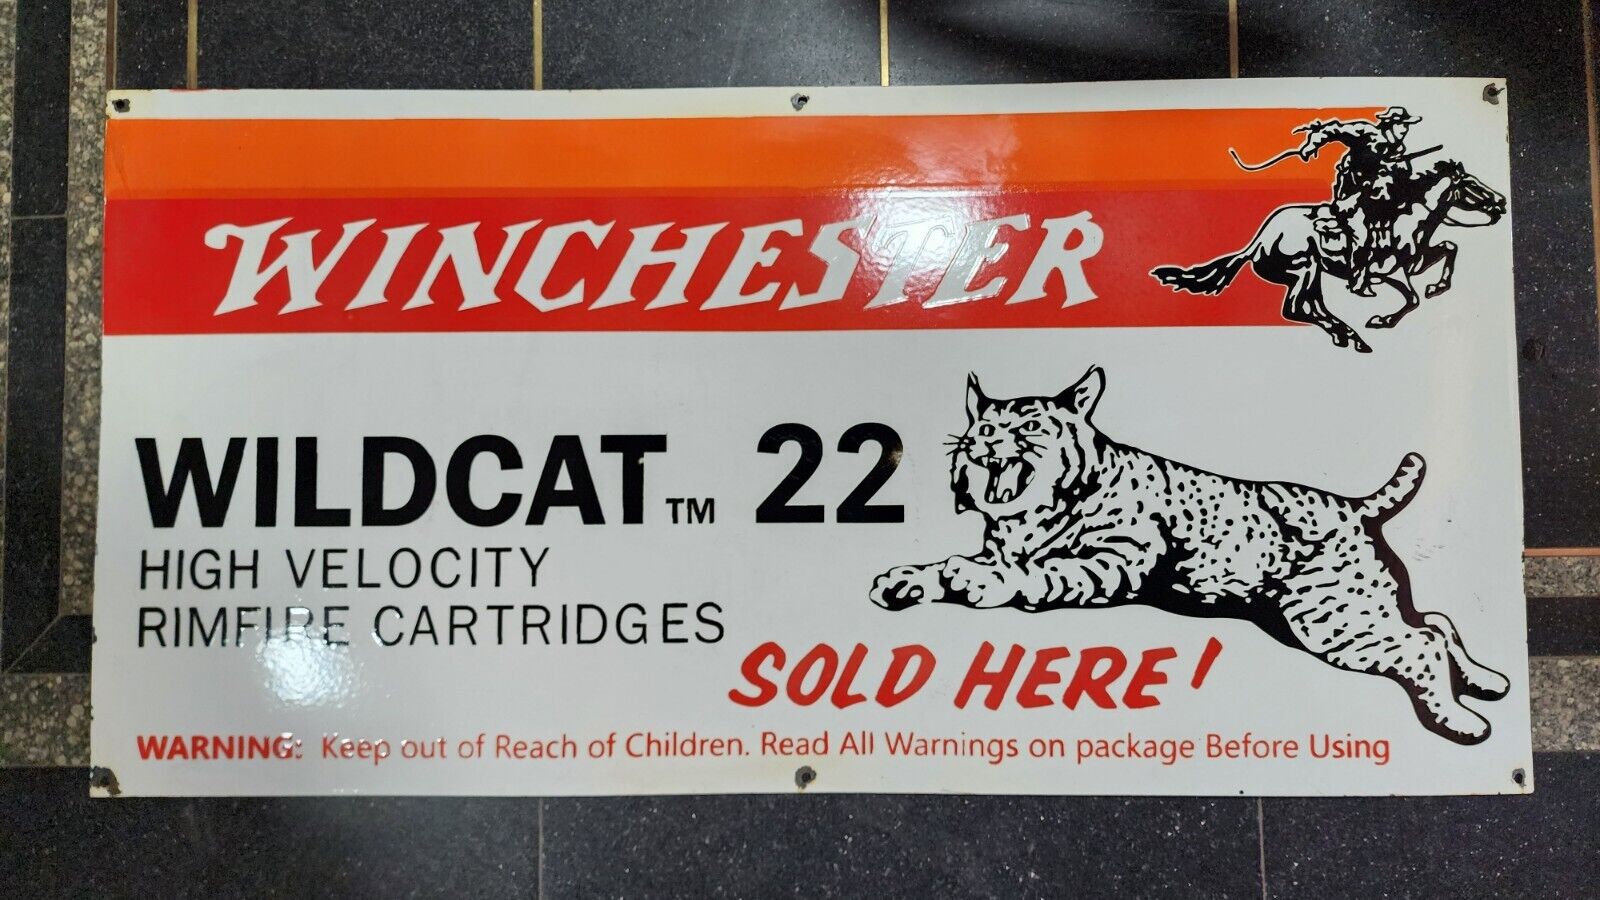 WINCHESTER WILDCAT PORCELAIN ENAMEL SIGN 48 X 24 INCHES